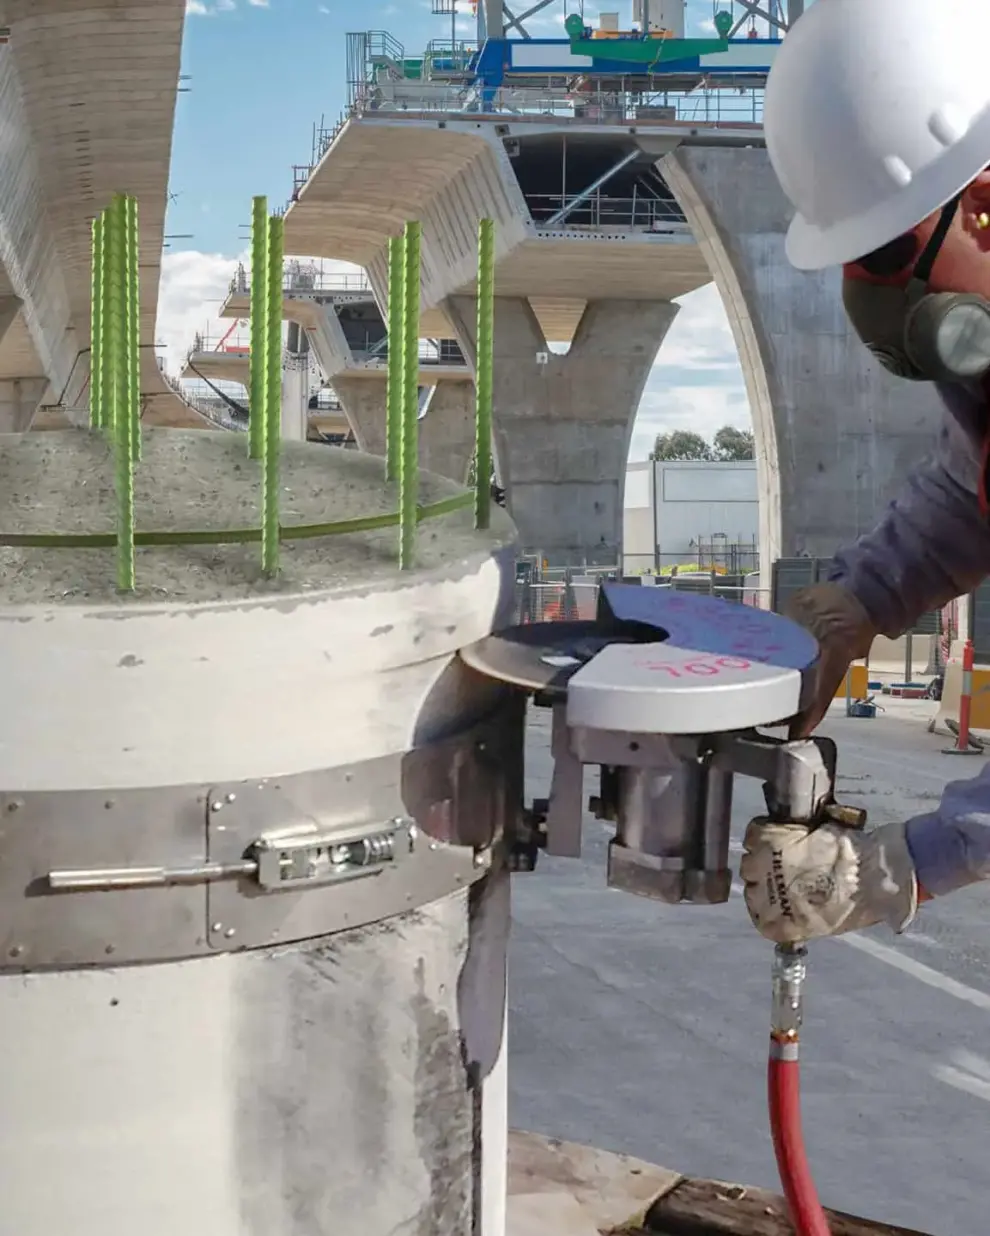 CONCRETE PILING SAW SCORES EVENLY TO SPEED TOP REMOVAL